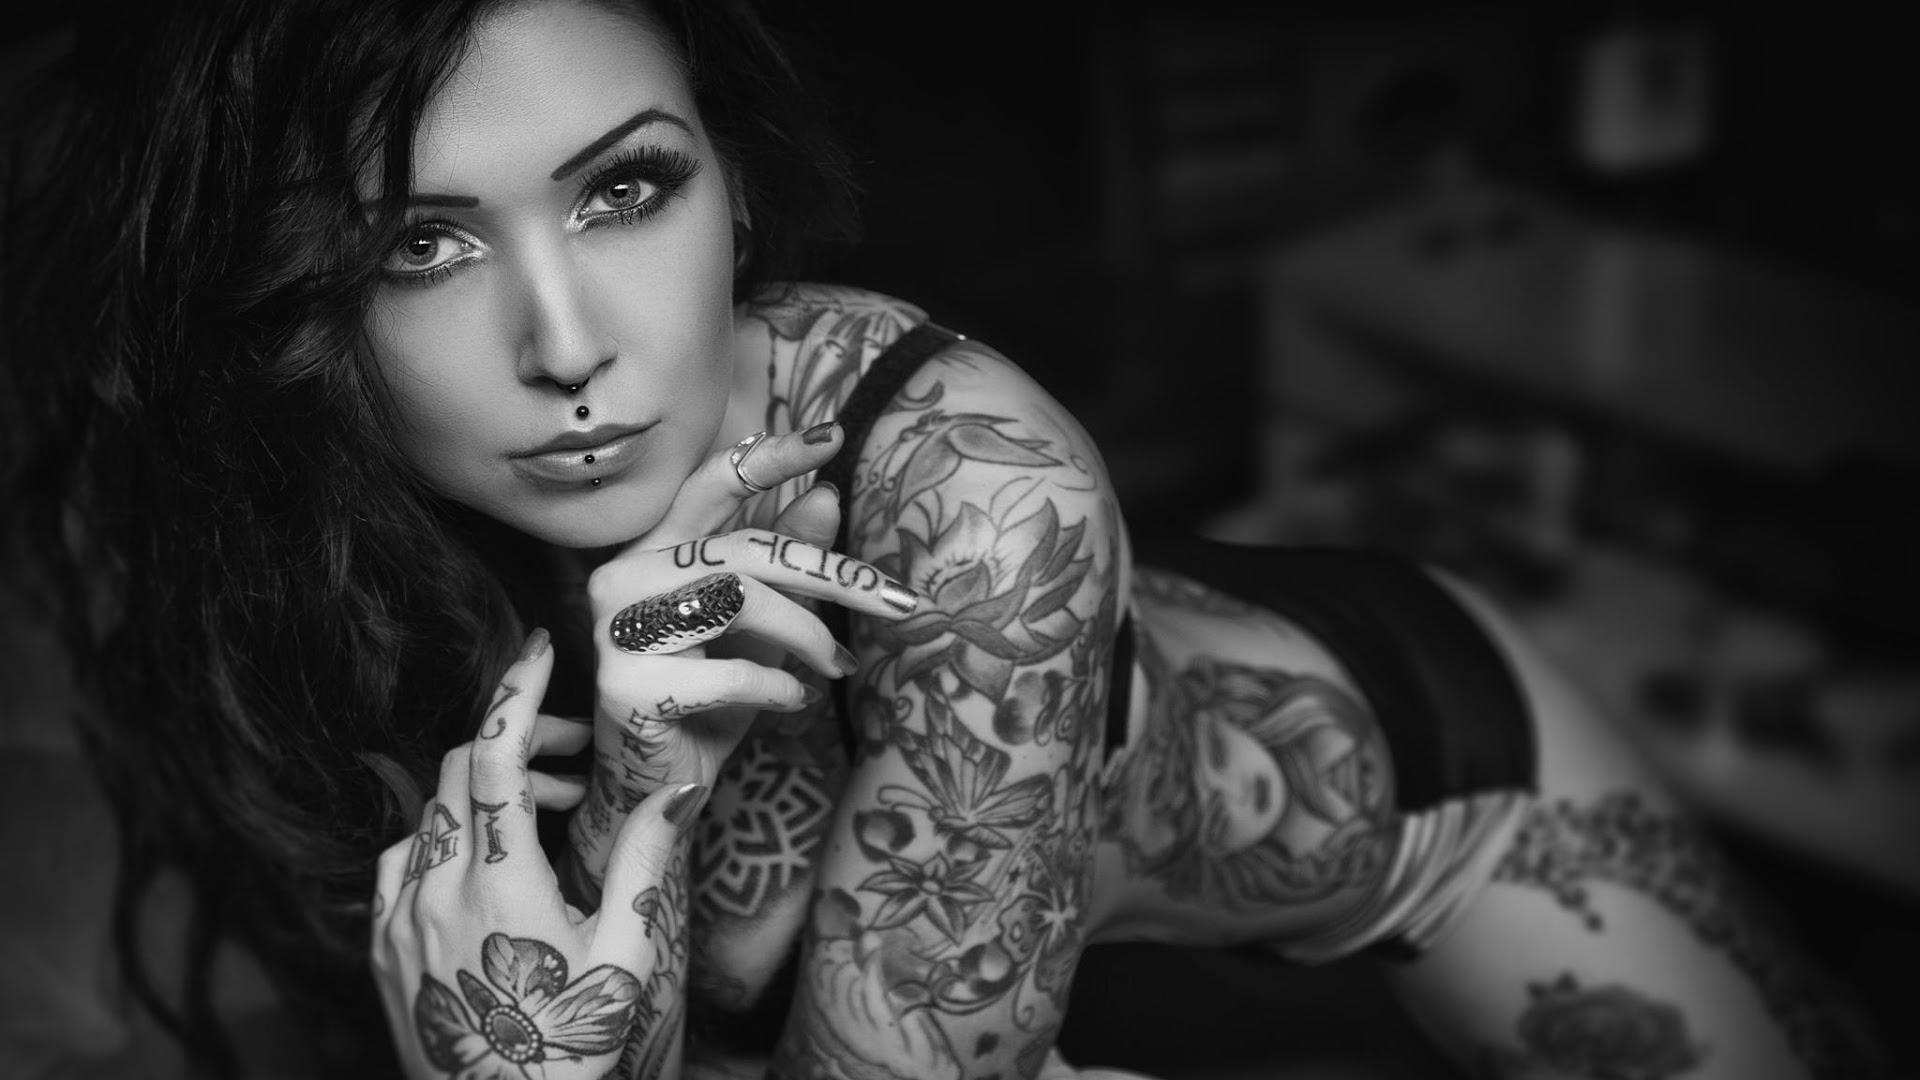 Tattoo Girl Wallpaper Group with 56 items